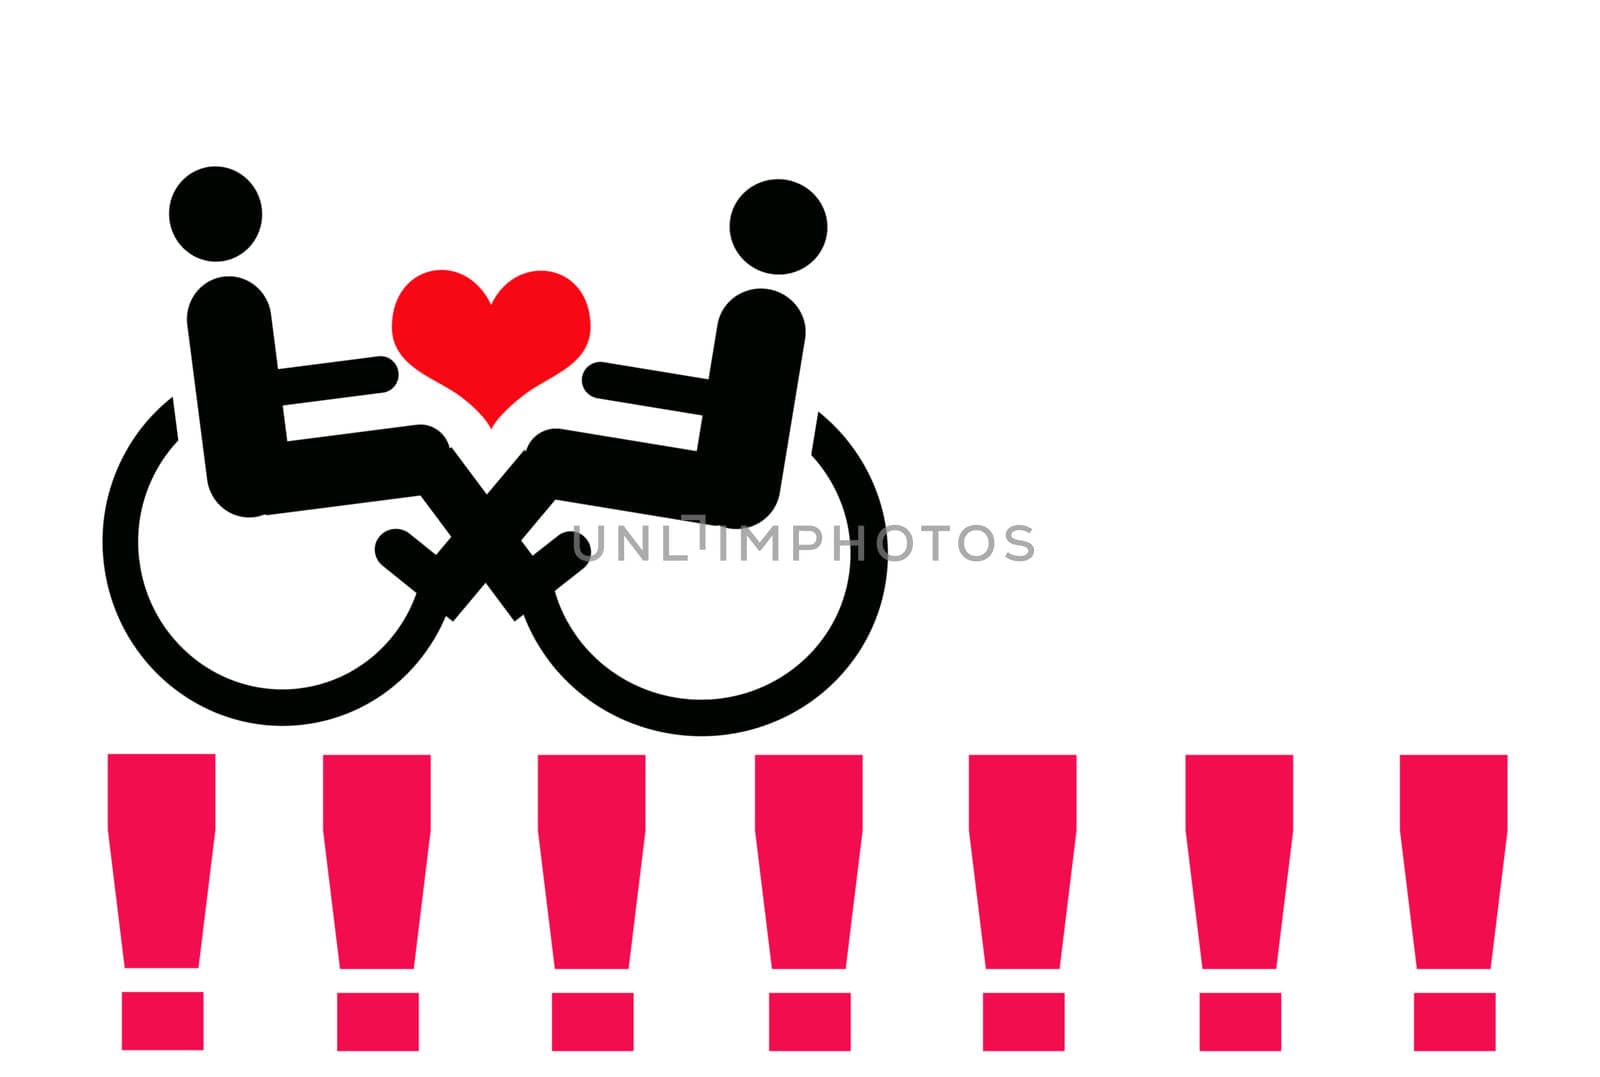 abstract creative symbolic image of relations between disabled persons and their protection